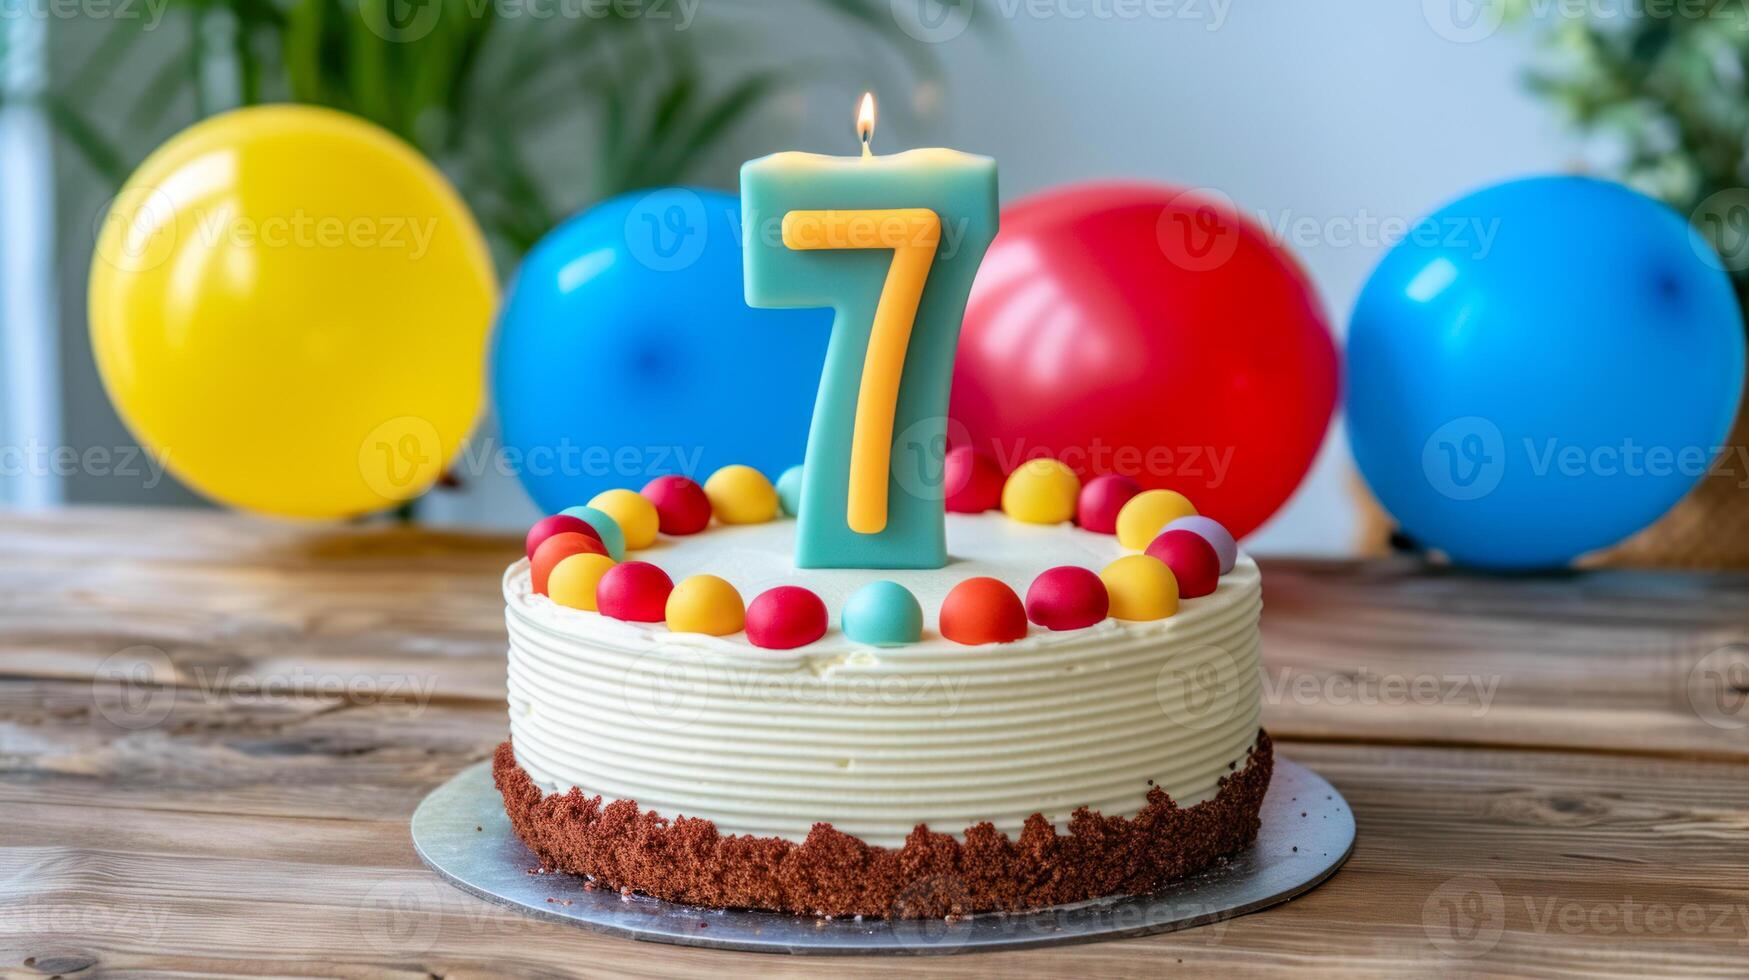 Seventh Birthday Celebration Cake with Colorful Balloons and Number Seven Candle. photo